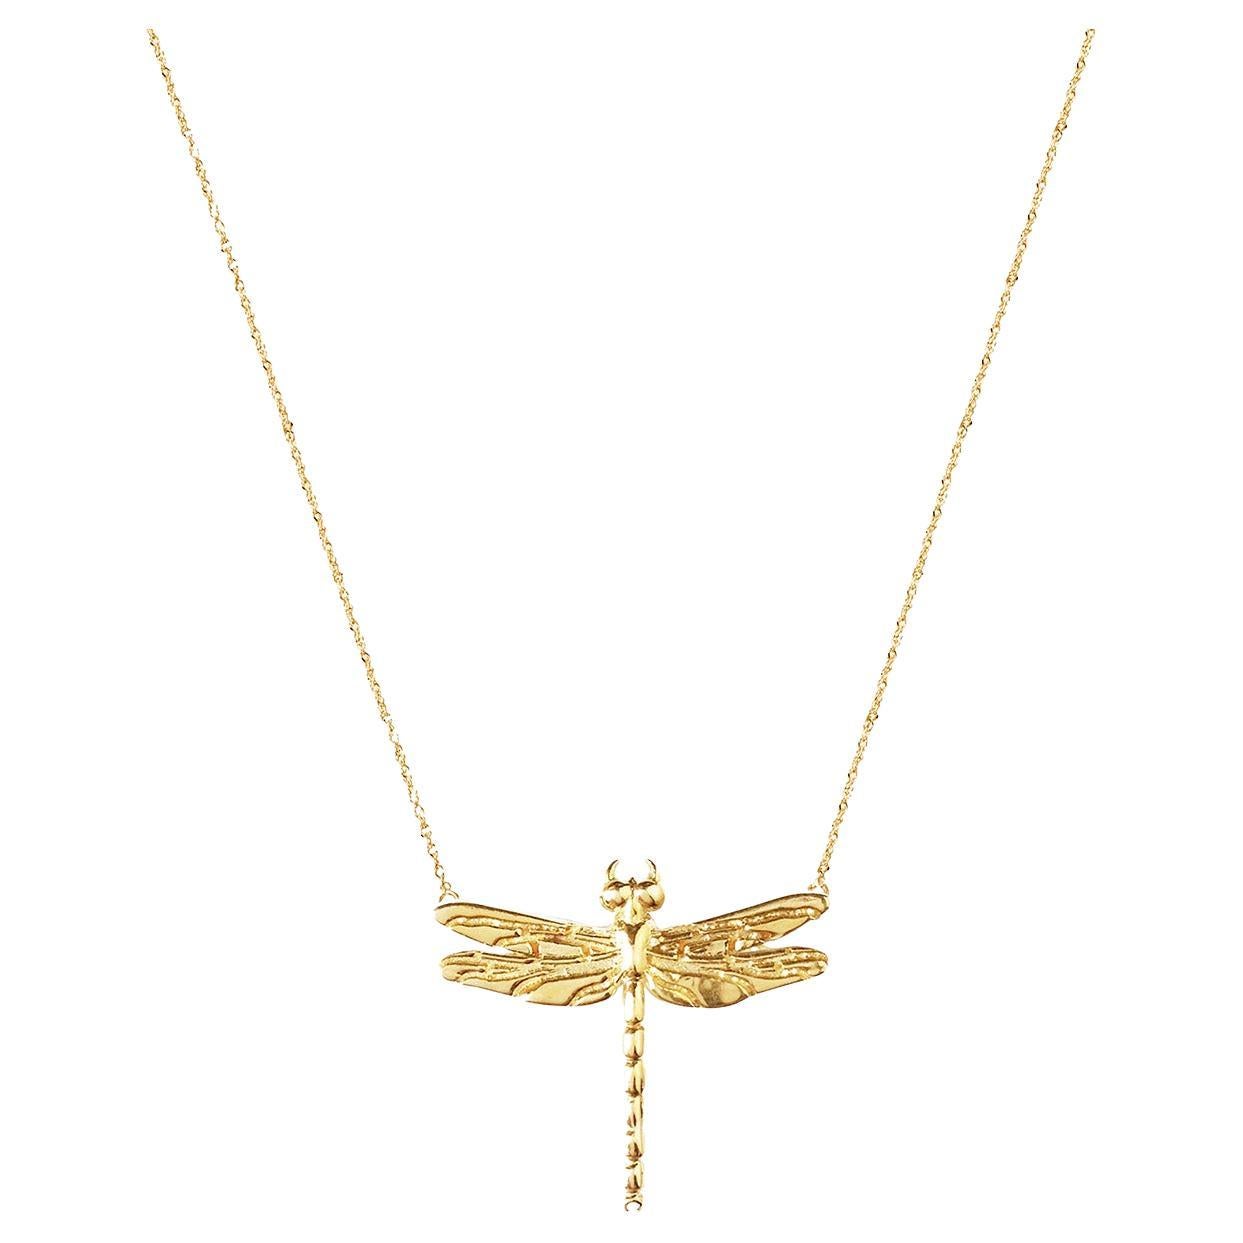 Small Dragonfly Necklace / Yellow Gold Plated